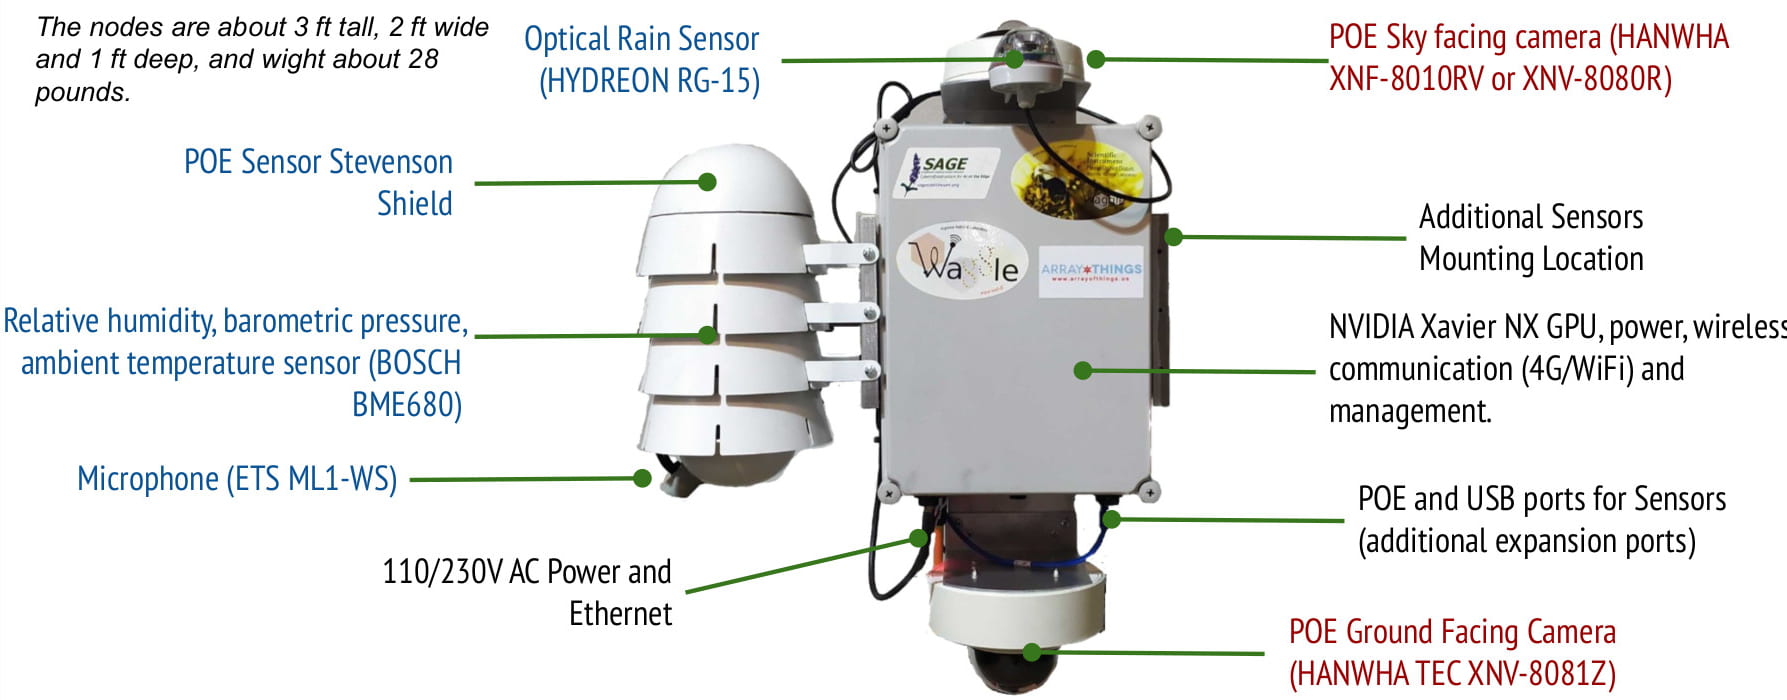 The diagram illustrates the sensors attached to Wild Sage Node environmental monitoring devices